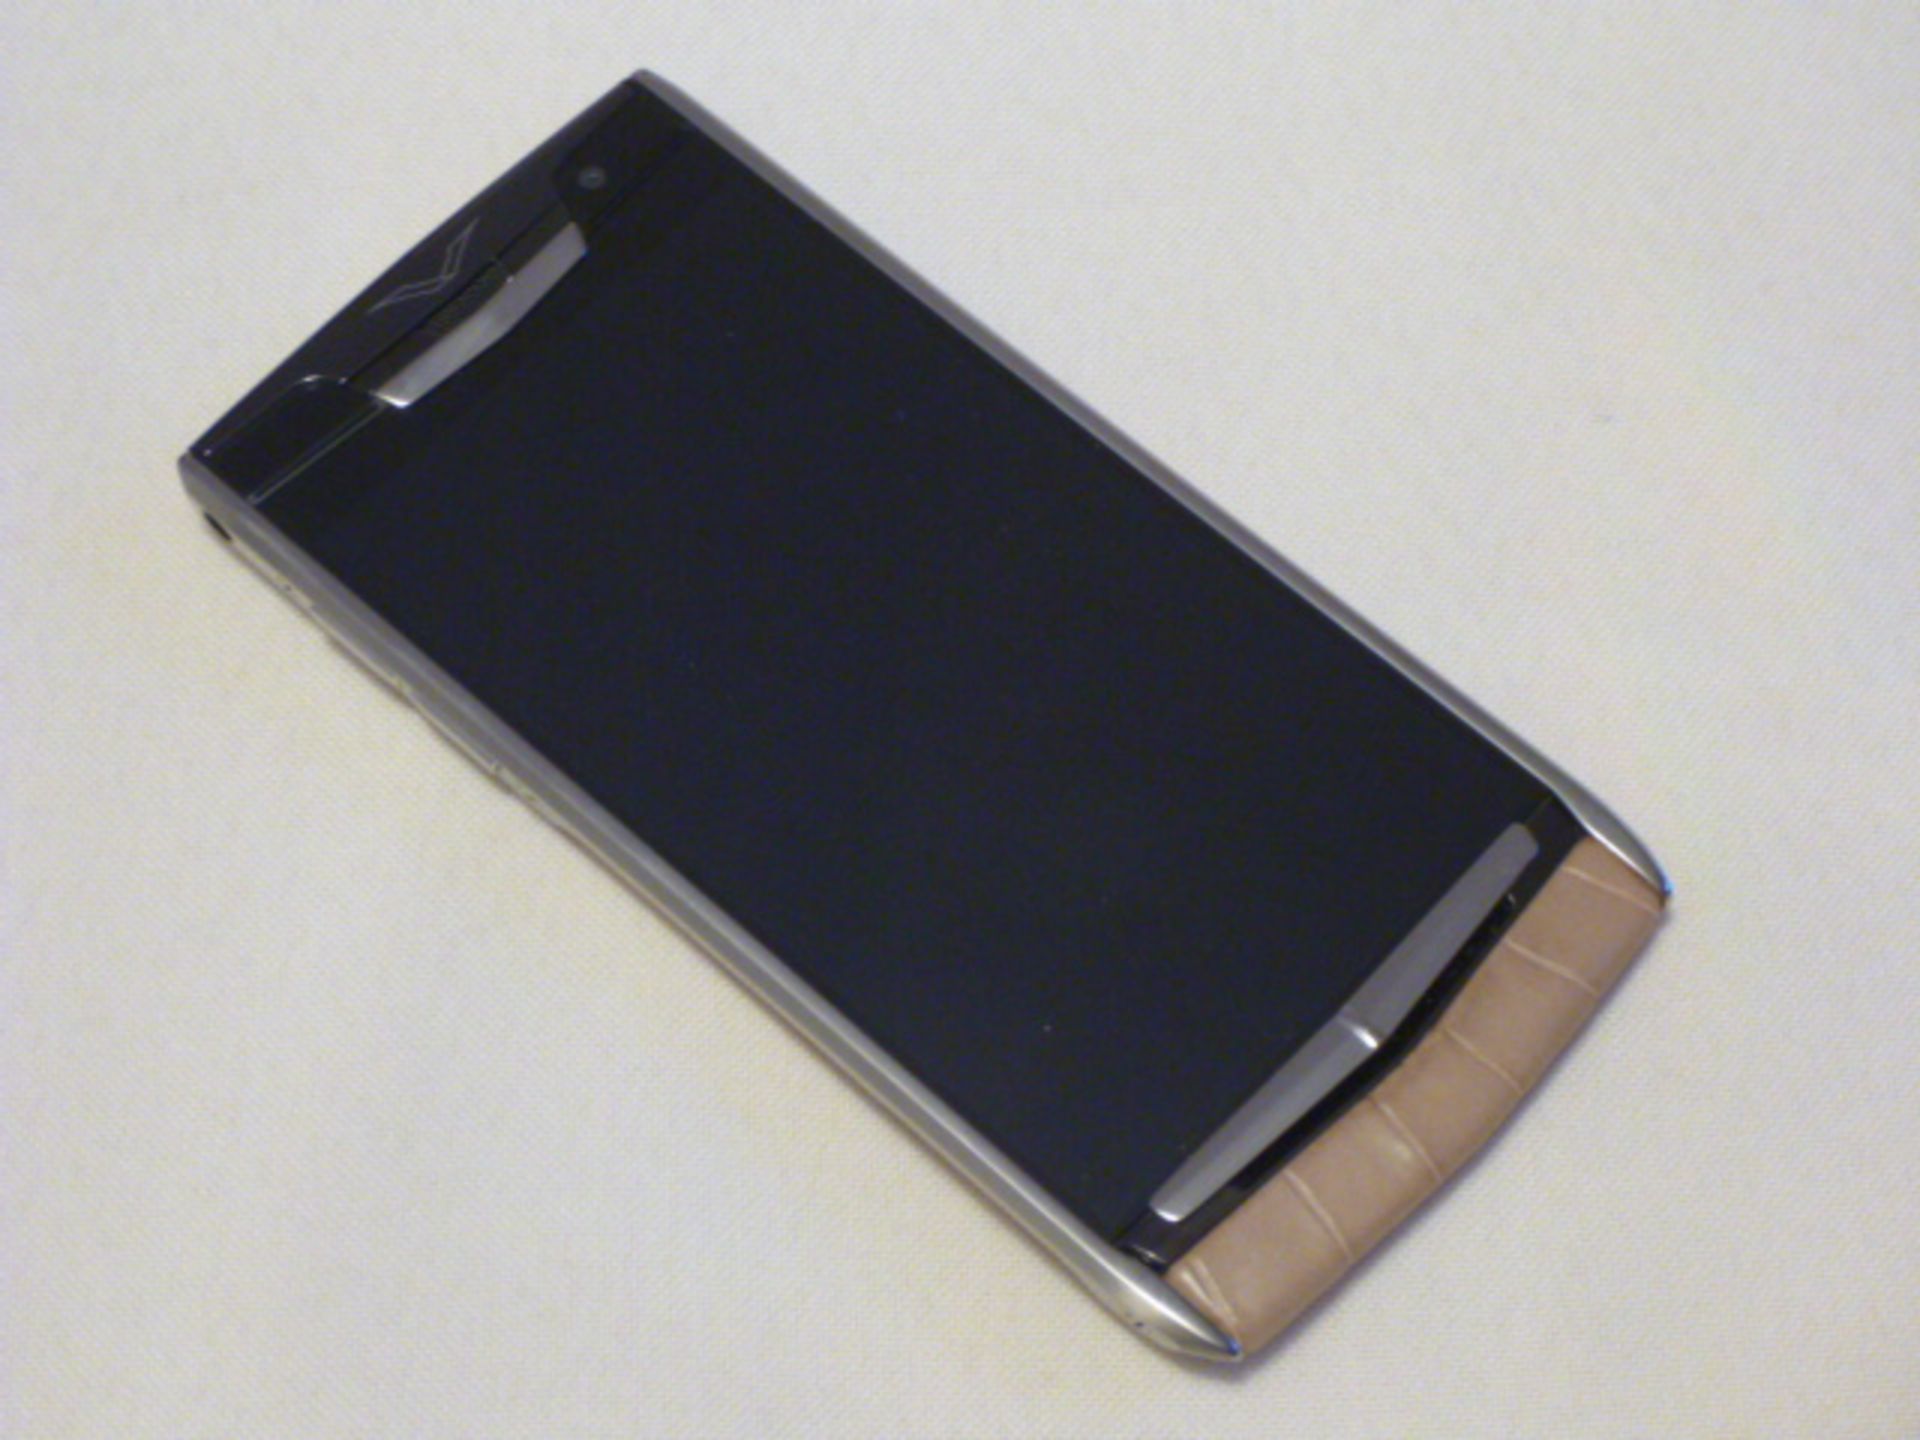 Vertu Signature Touch Phone, Almond Alligator GL2. S/N 3-021609. Comes with Sales Pack, Charging